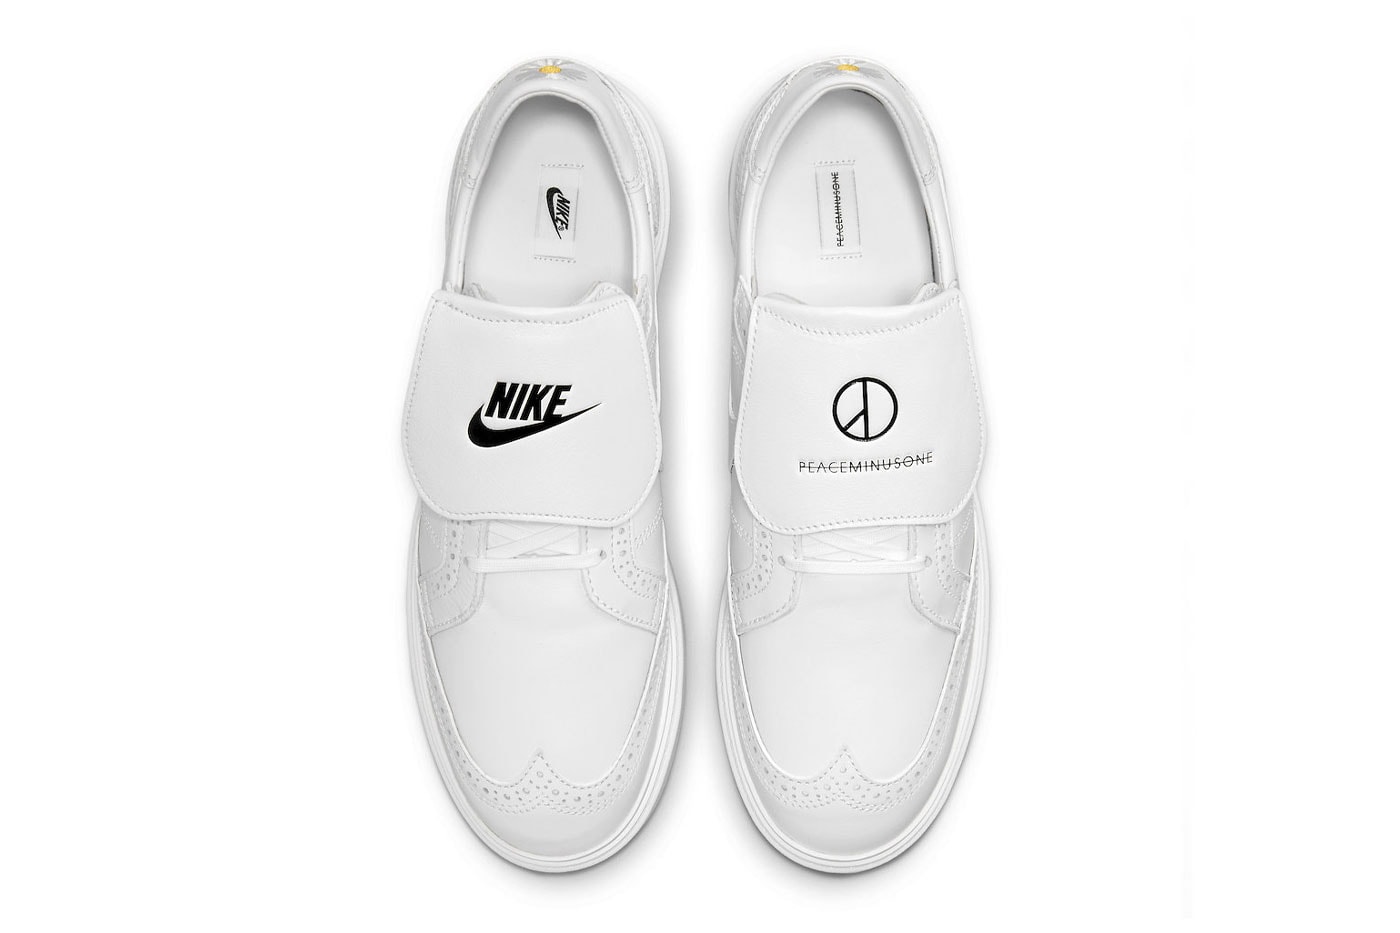 G-Dragon PEACEMINUSONE Nike Kwondo 1 Official Look Release Info dh2482-100 Date Buy Price 